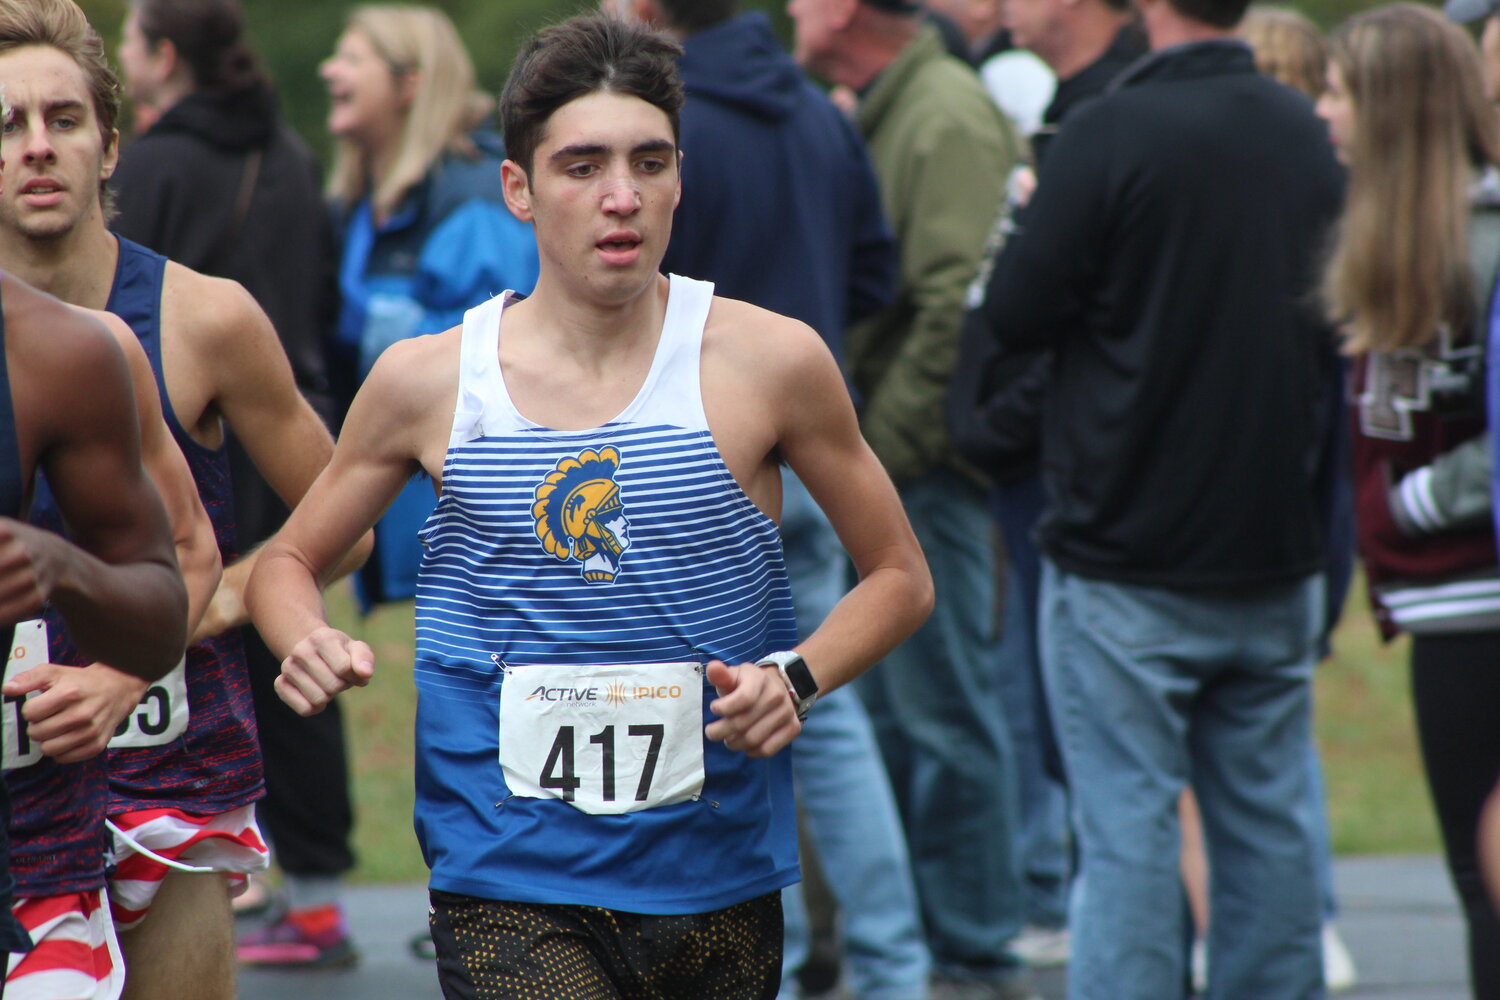 Crawfordsville's Ryan Miller capped off his XC career by leading the Athenians to a county and conference title along with a Regional appearance.